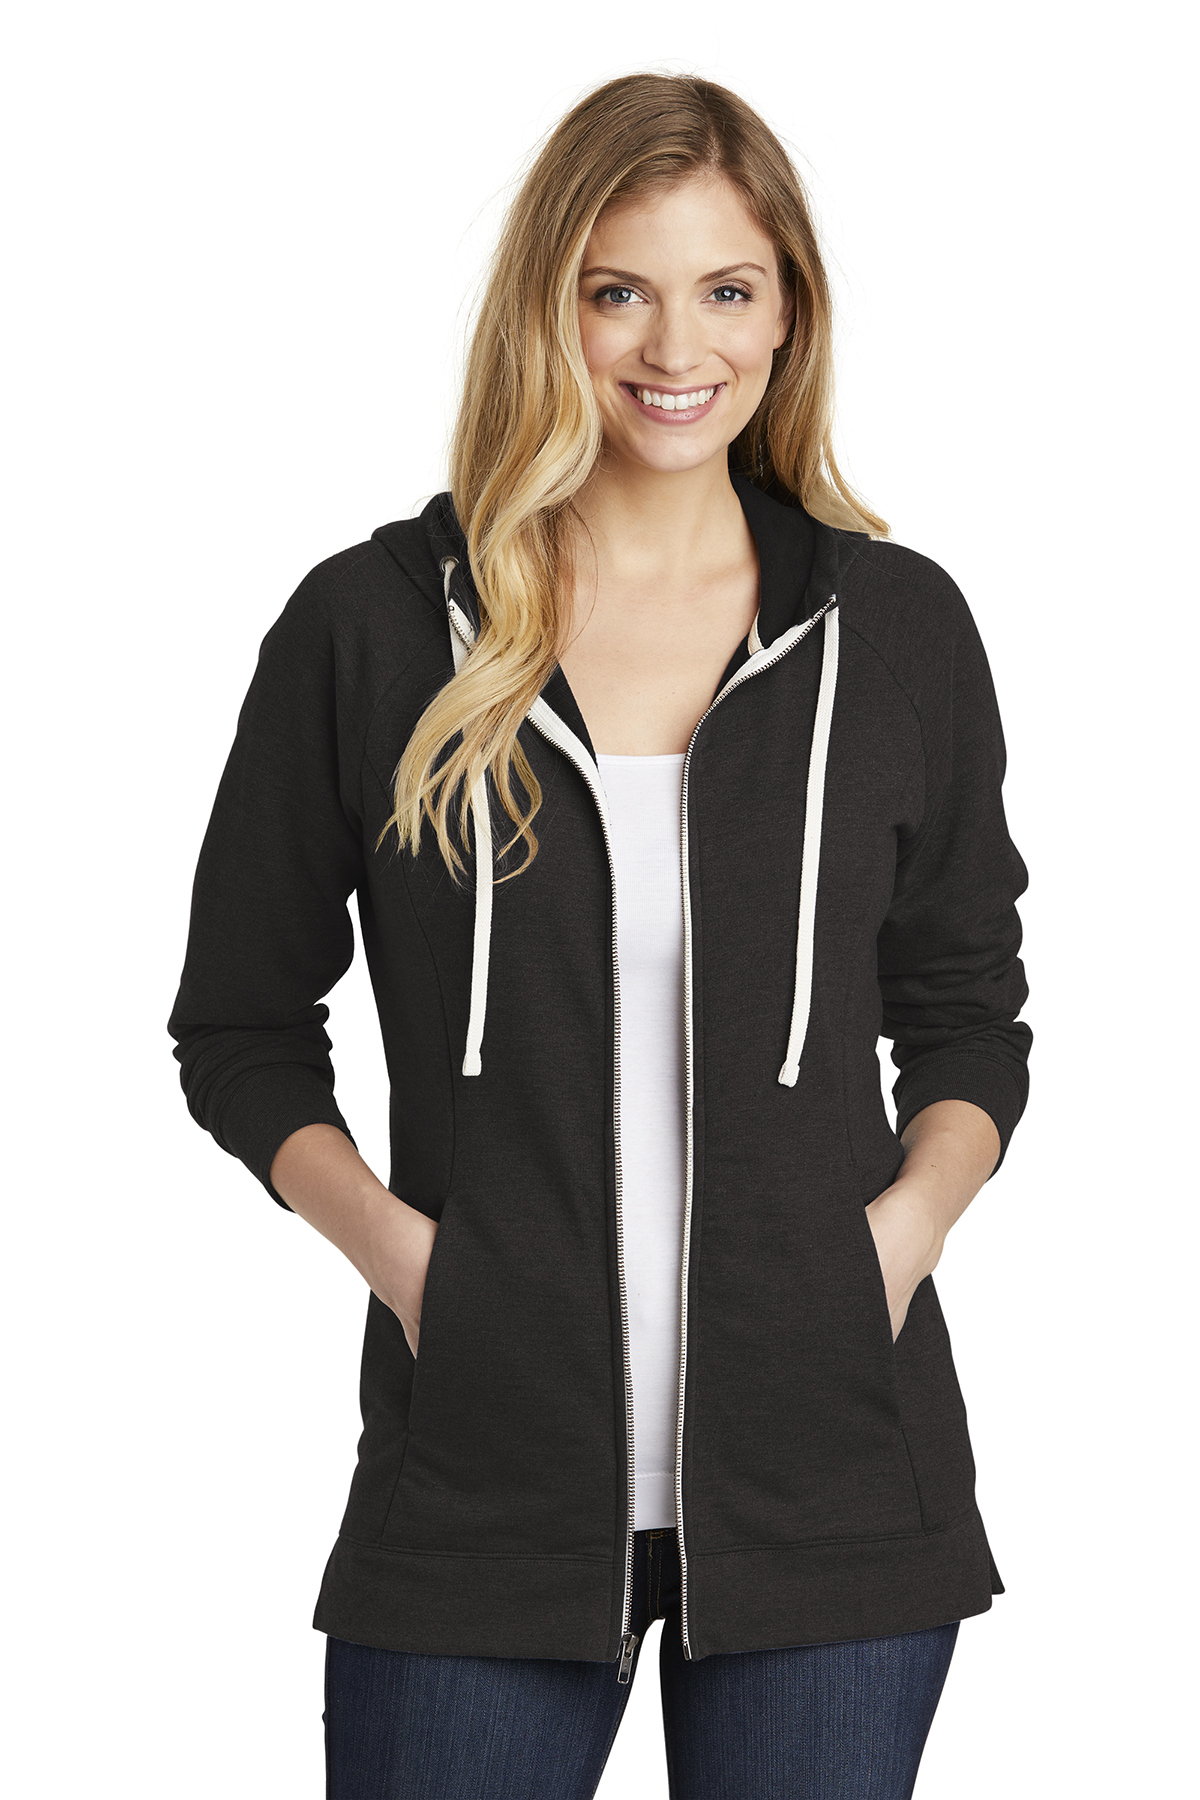 District DT456 - Women's Perfect Tri French Terry Full-Zip Hoodie